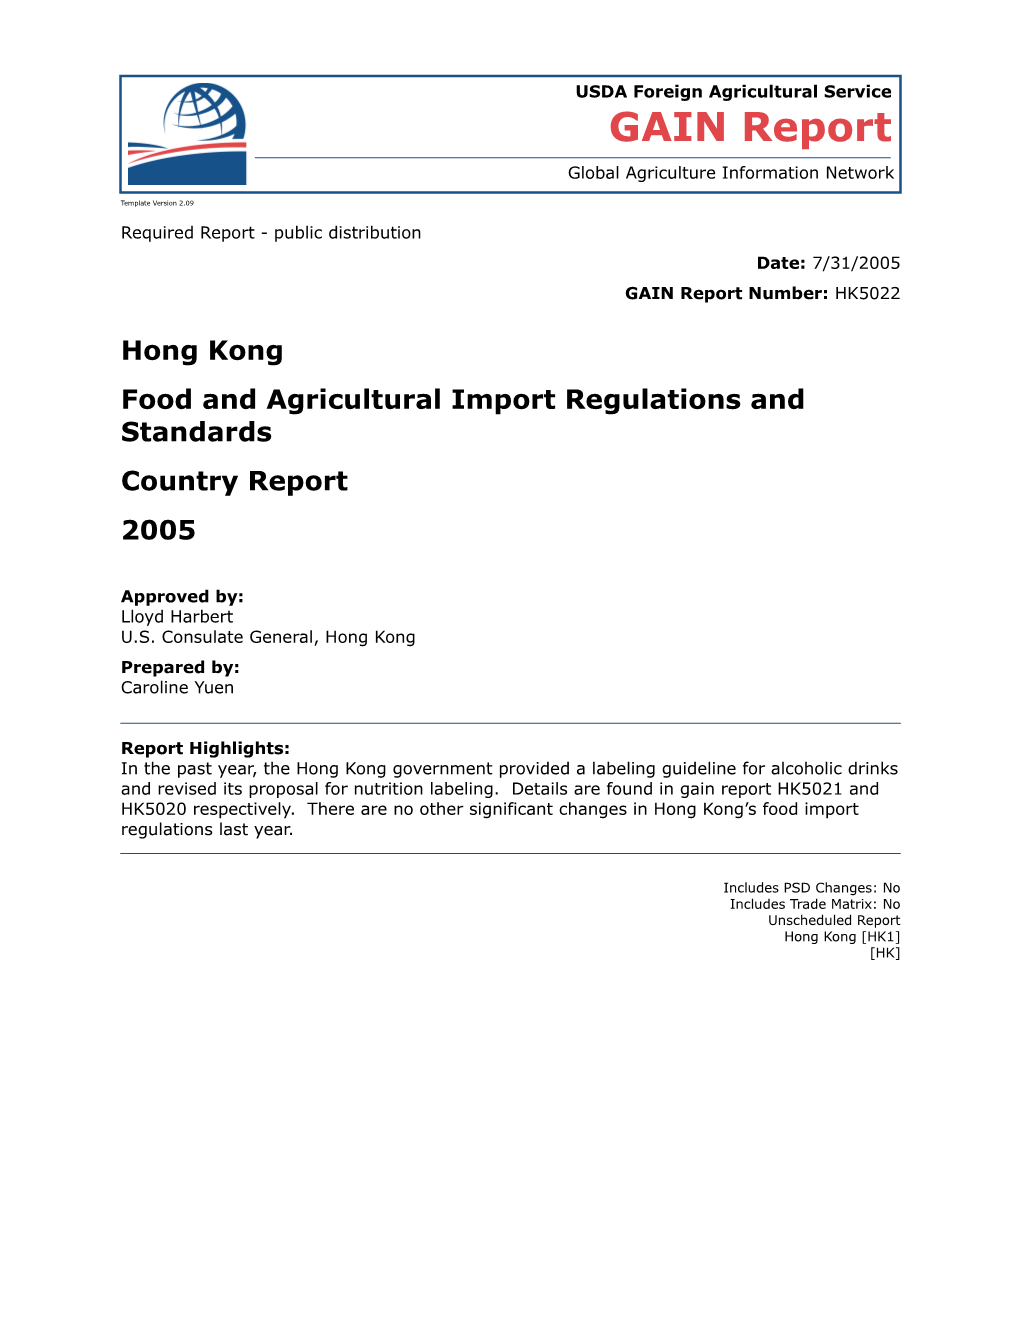 Food and Agricultural Import Regulations and Standards s13